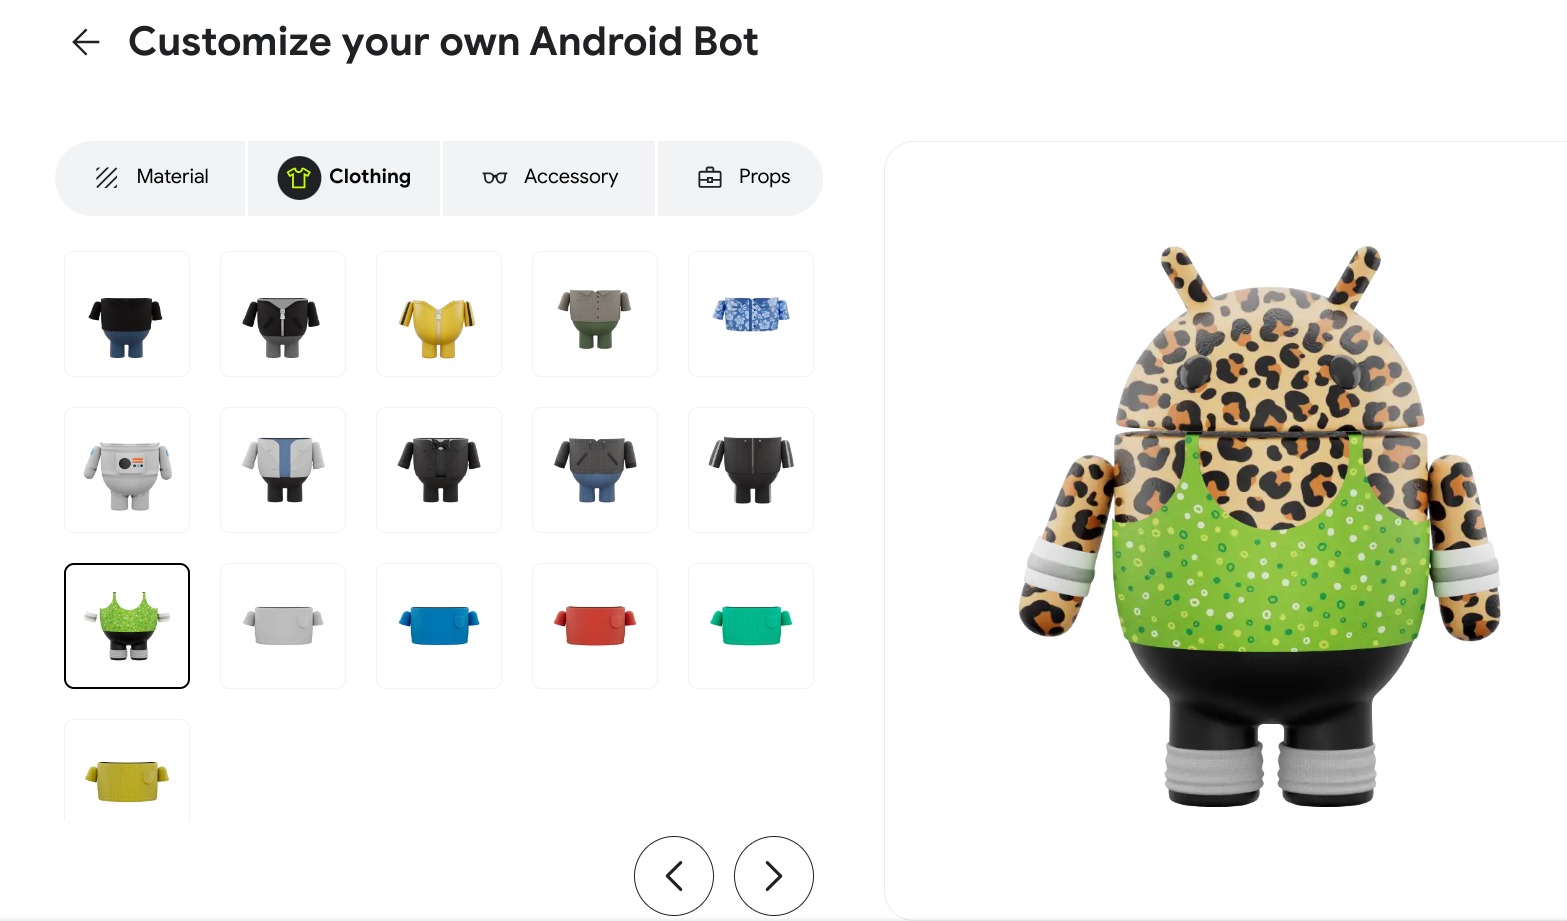 The Android mascot wearing a leotard